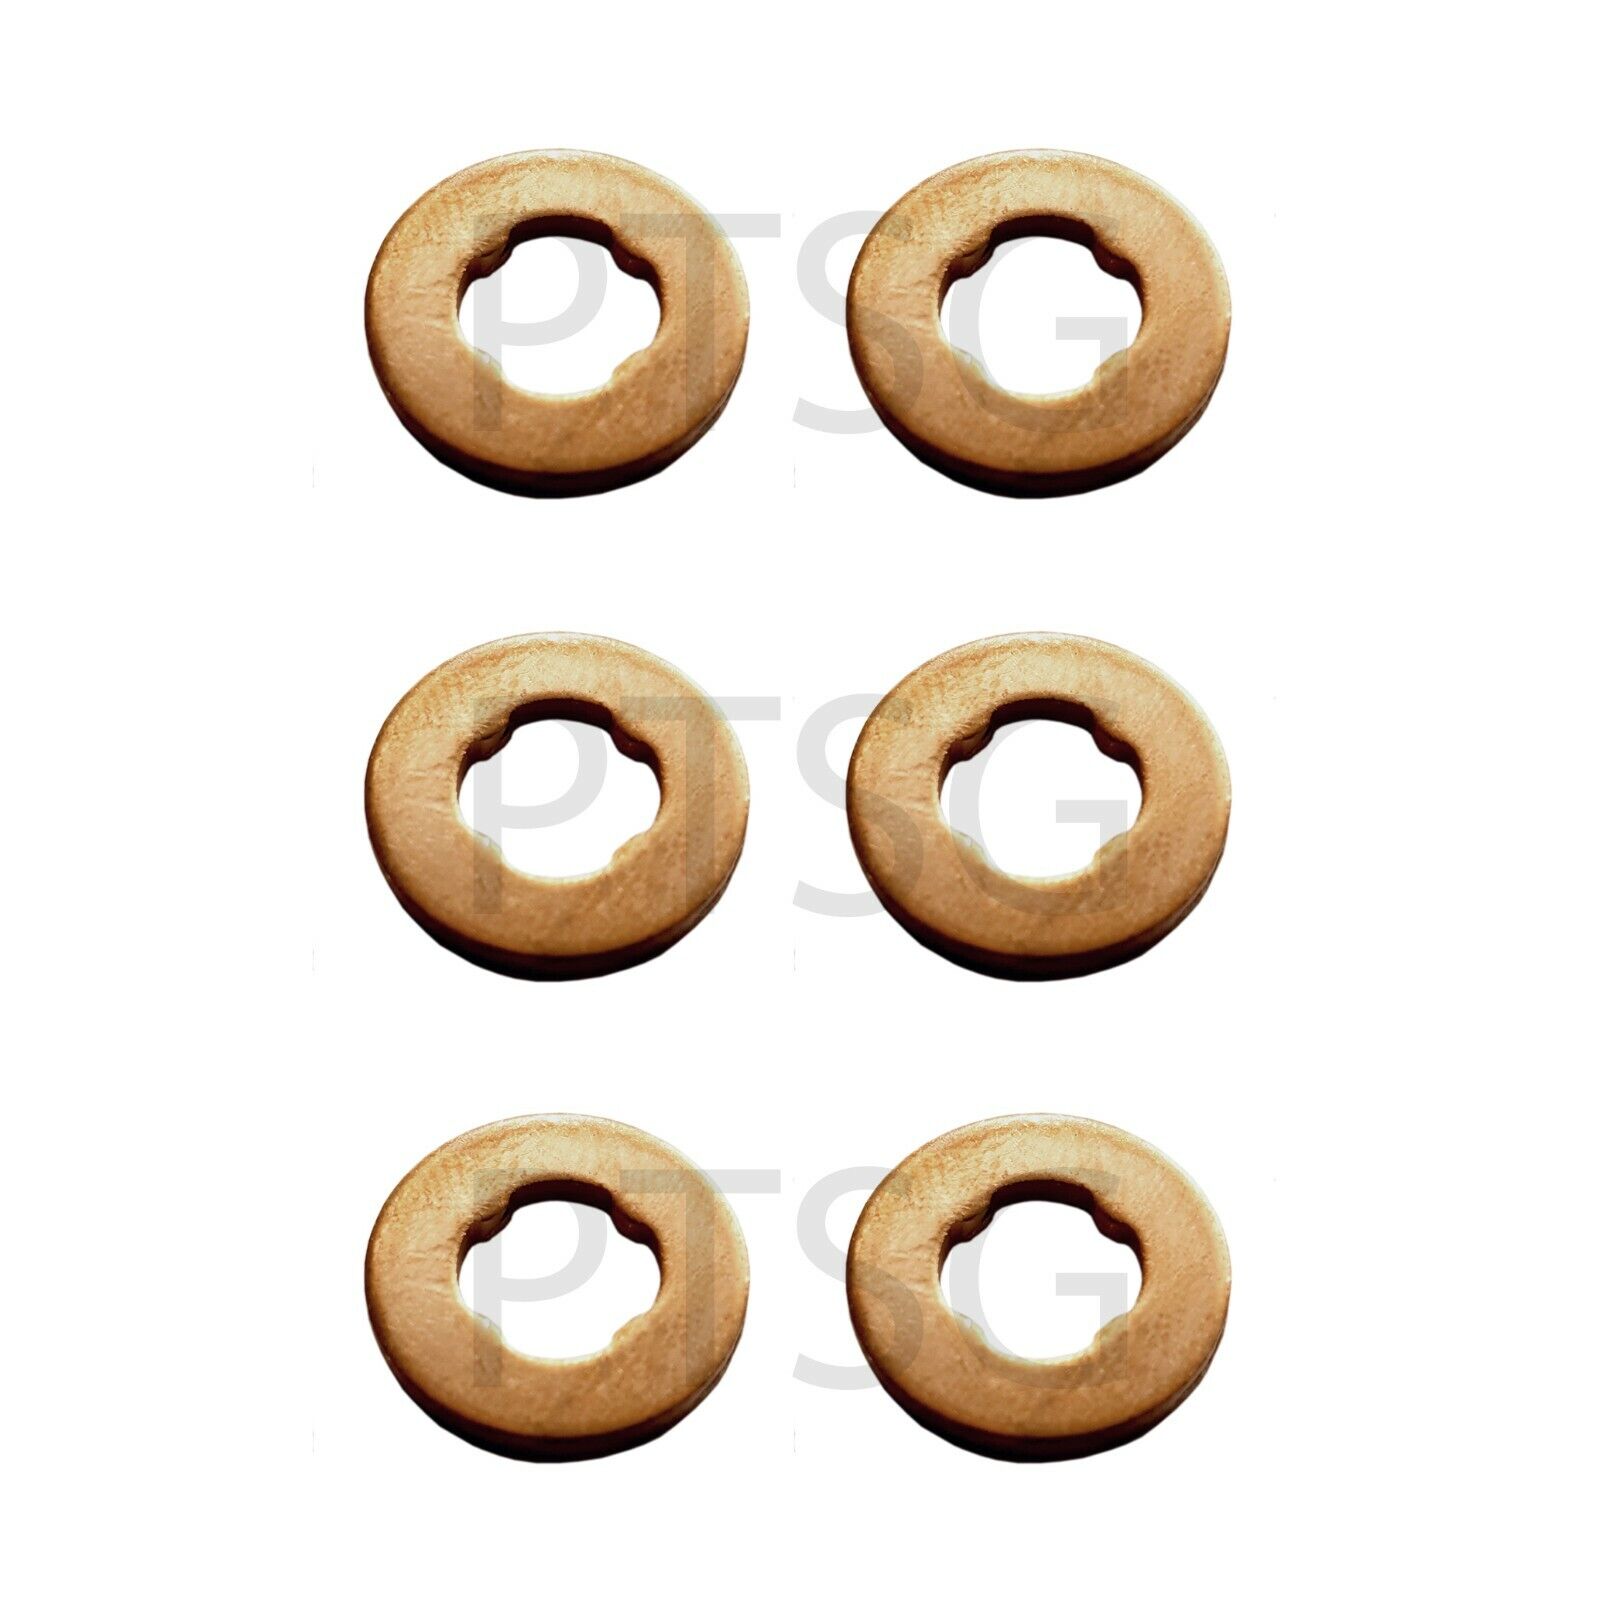 BMW Series 5 (F10) 530d and 530d xDrive Diesel Injector copper washers set x 6